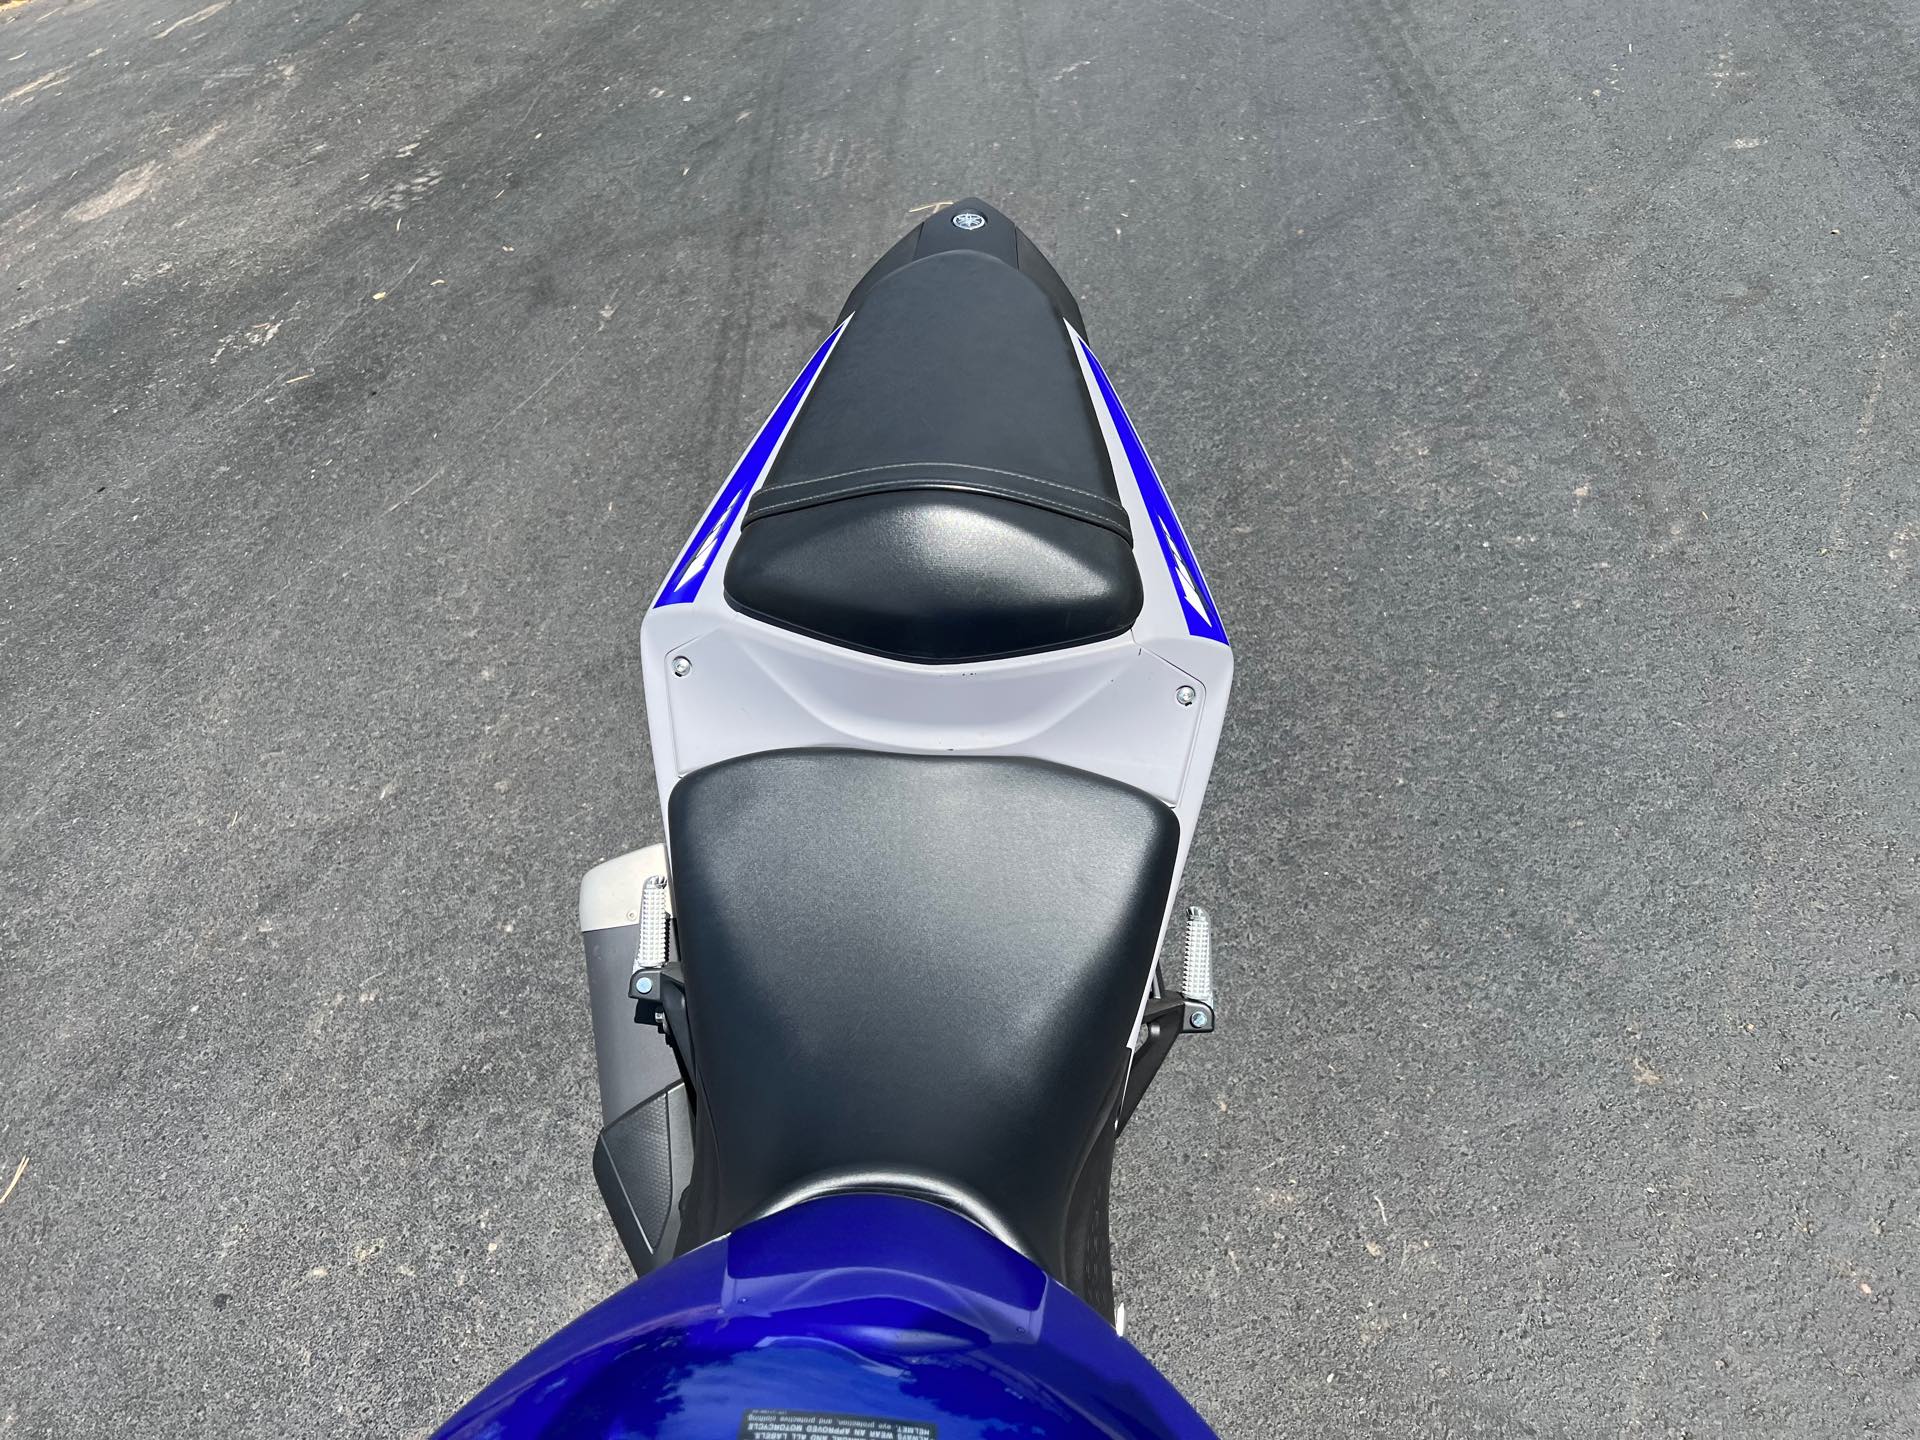 2021 Yamaha YZF R3 at Aces Motorcycles - Fort Collins